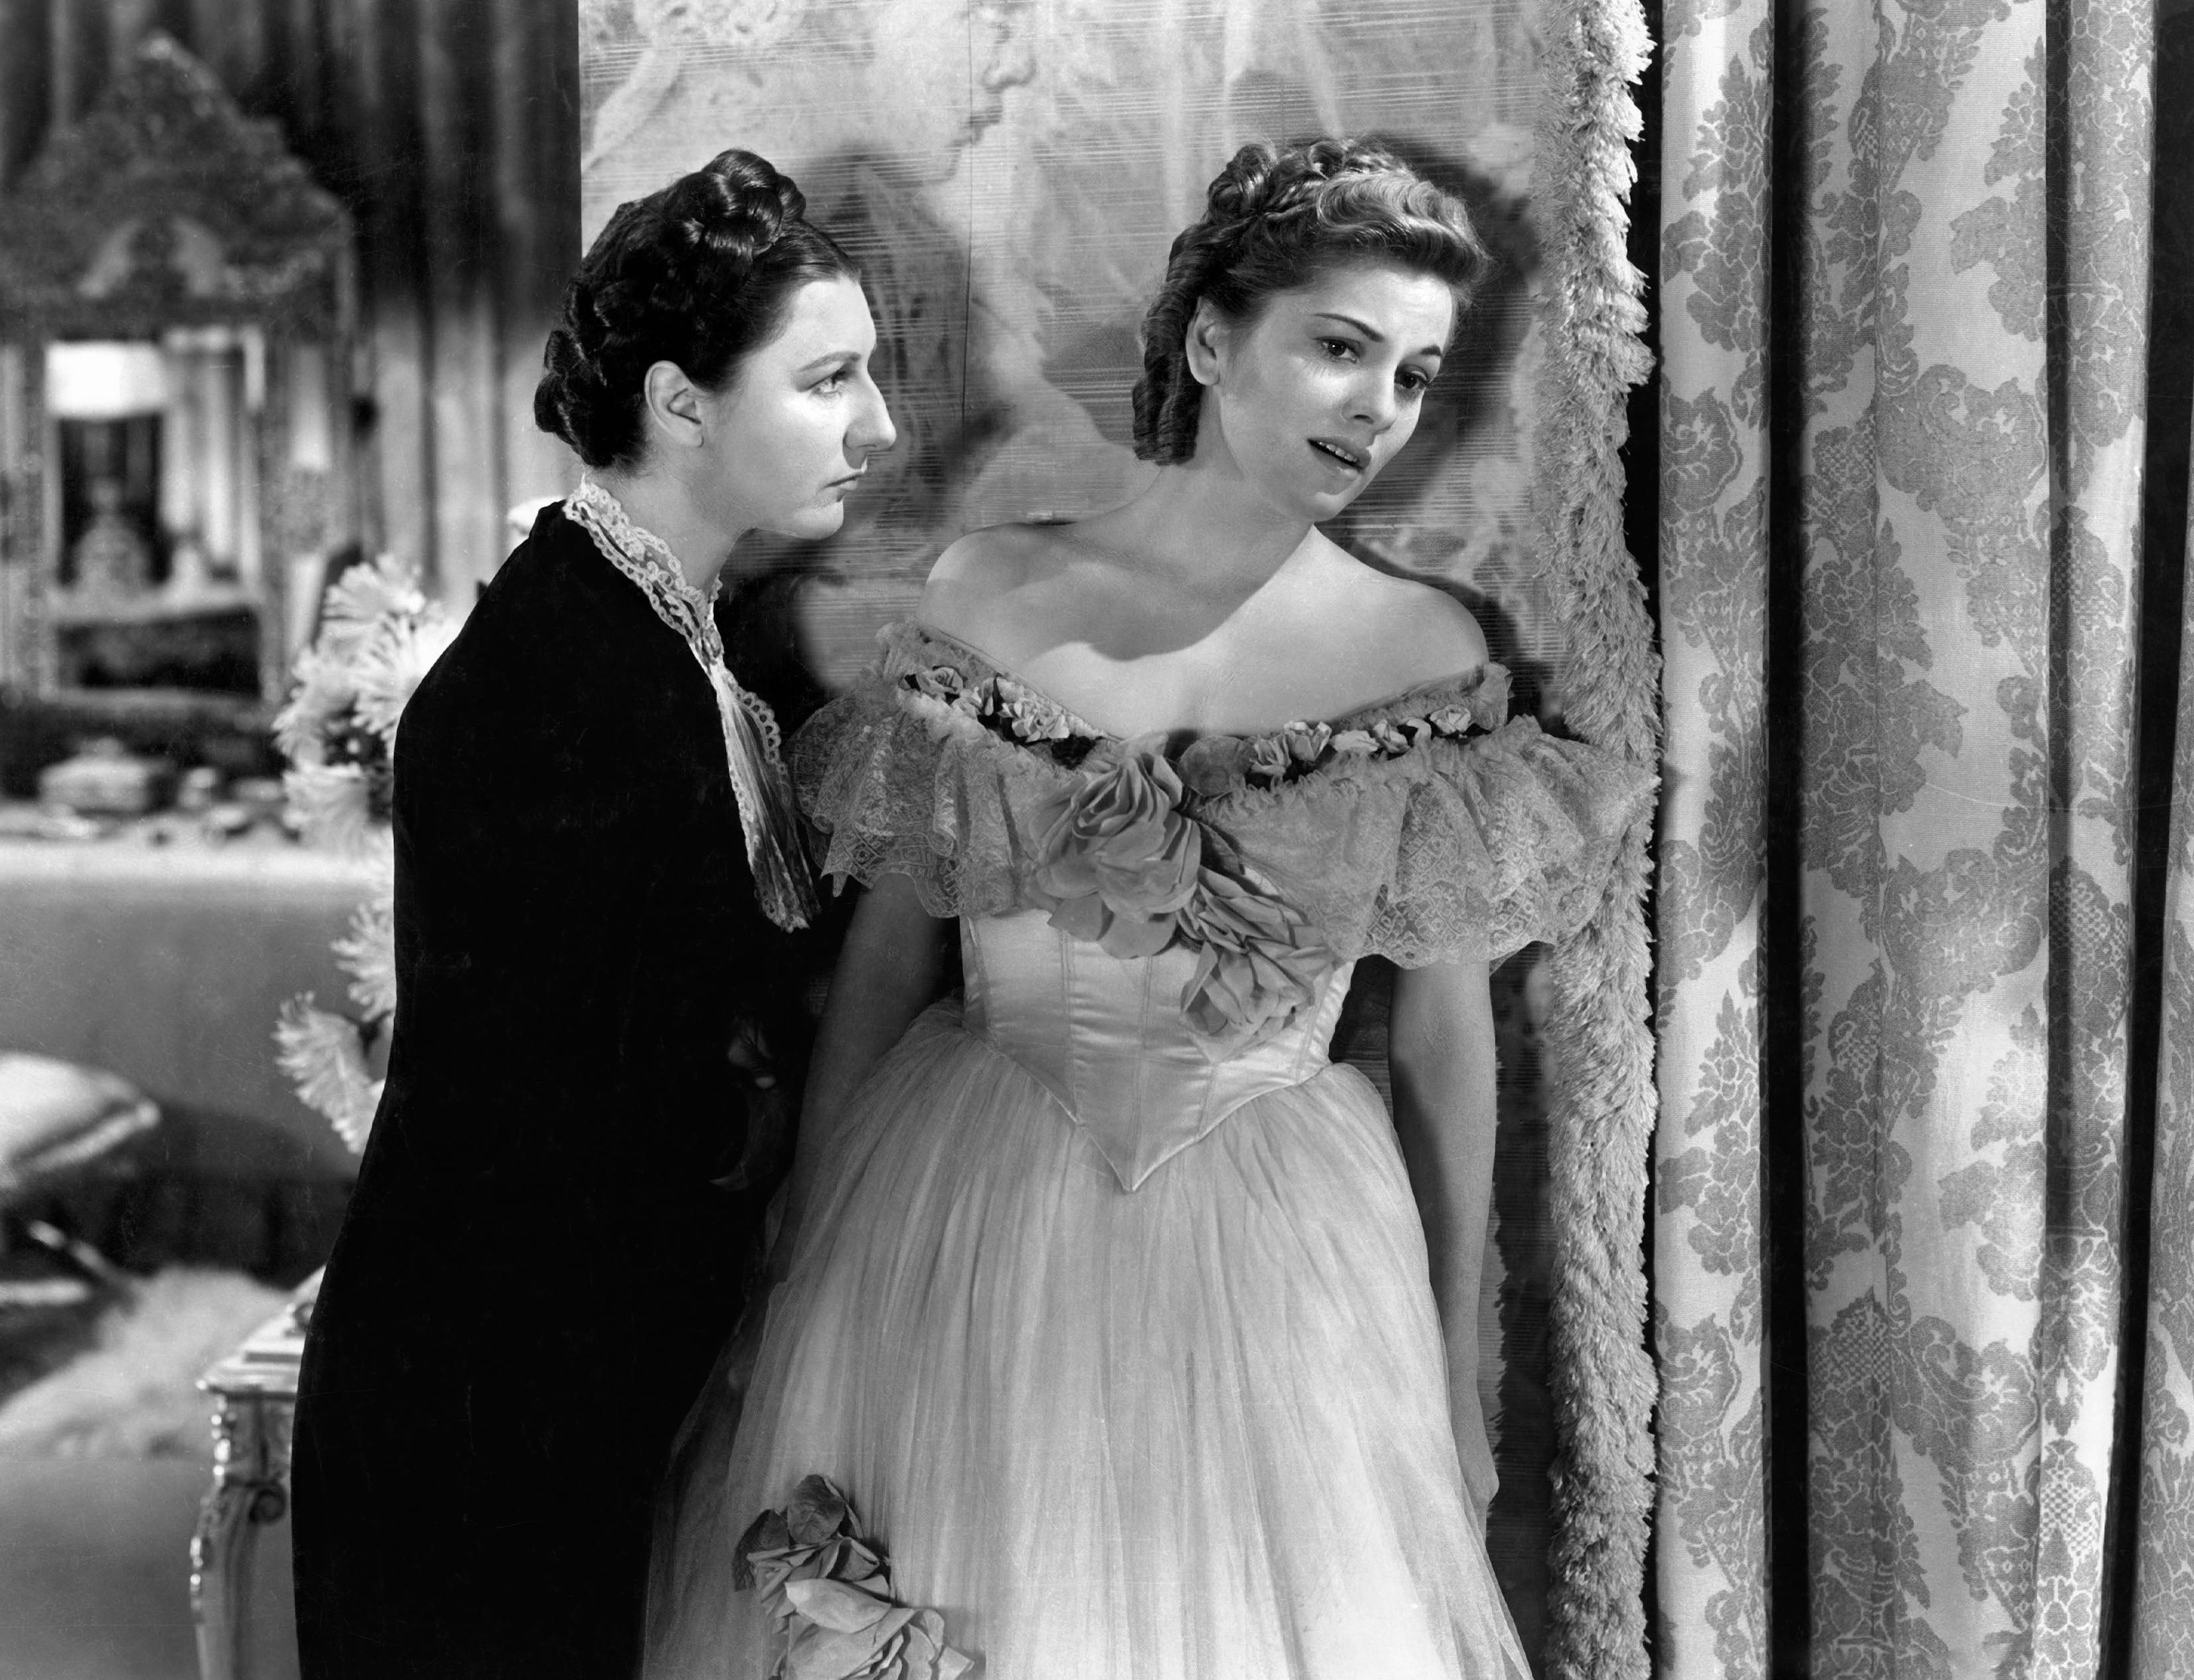 Judith Anderson and Joan Fontaine in Hitchcock's Rebecca